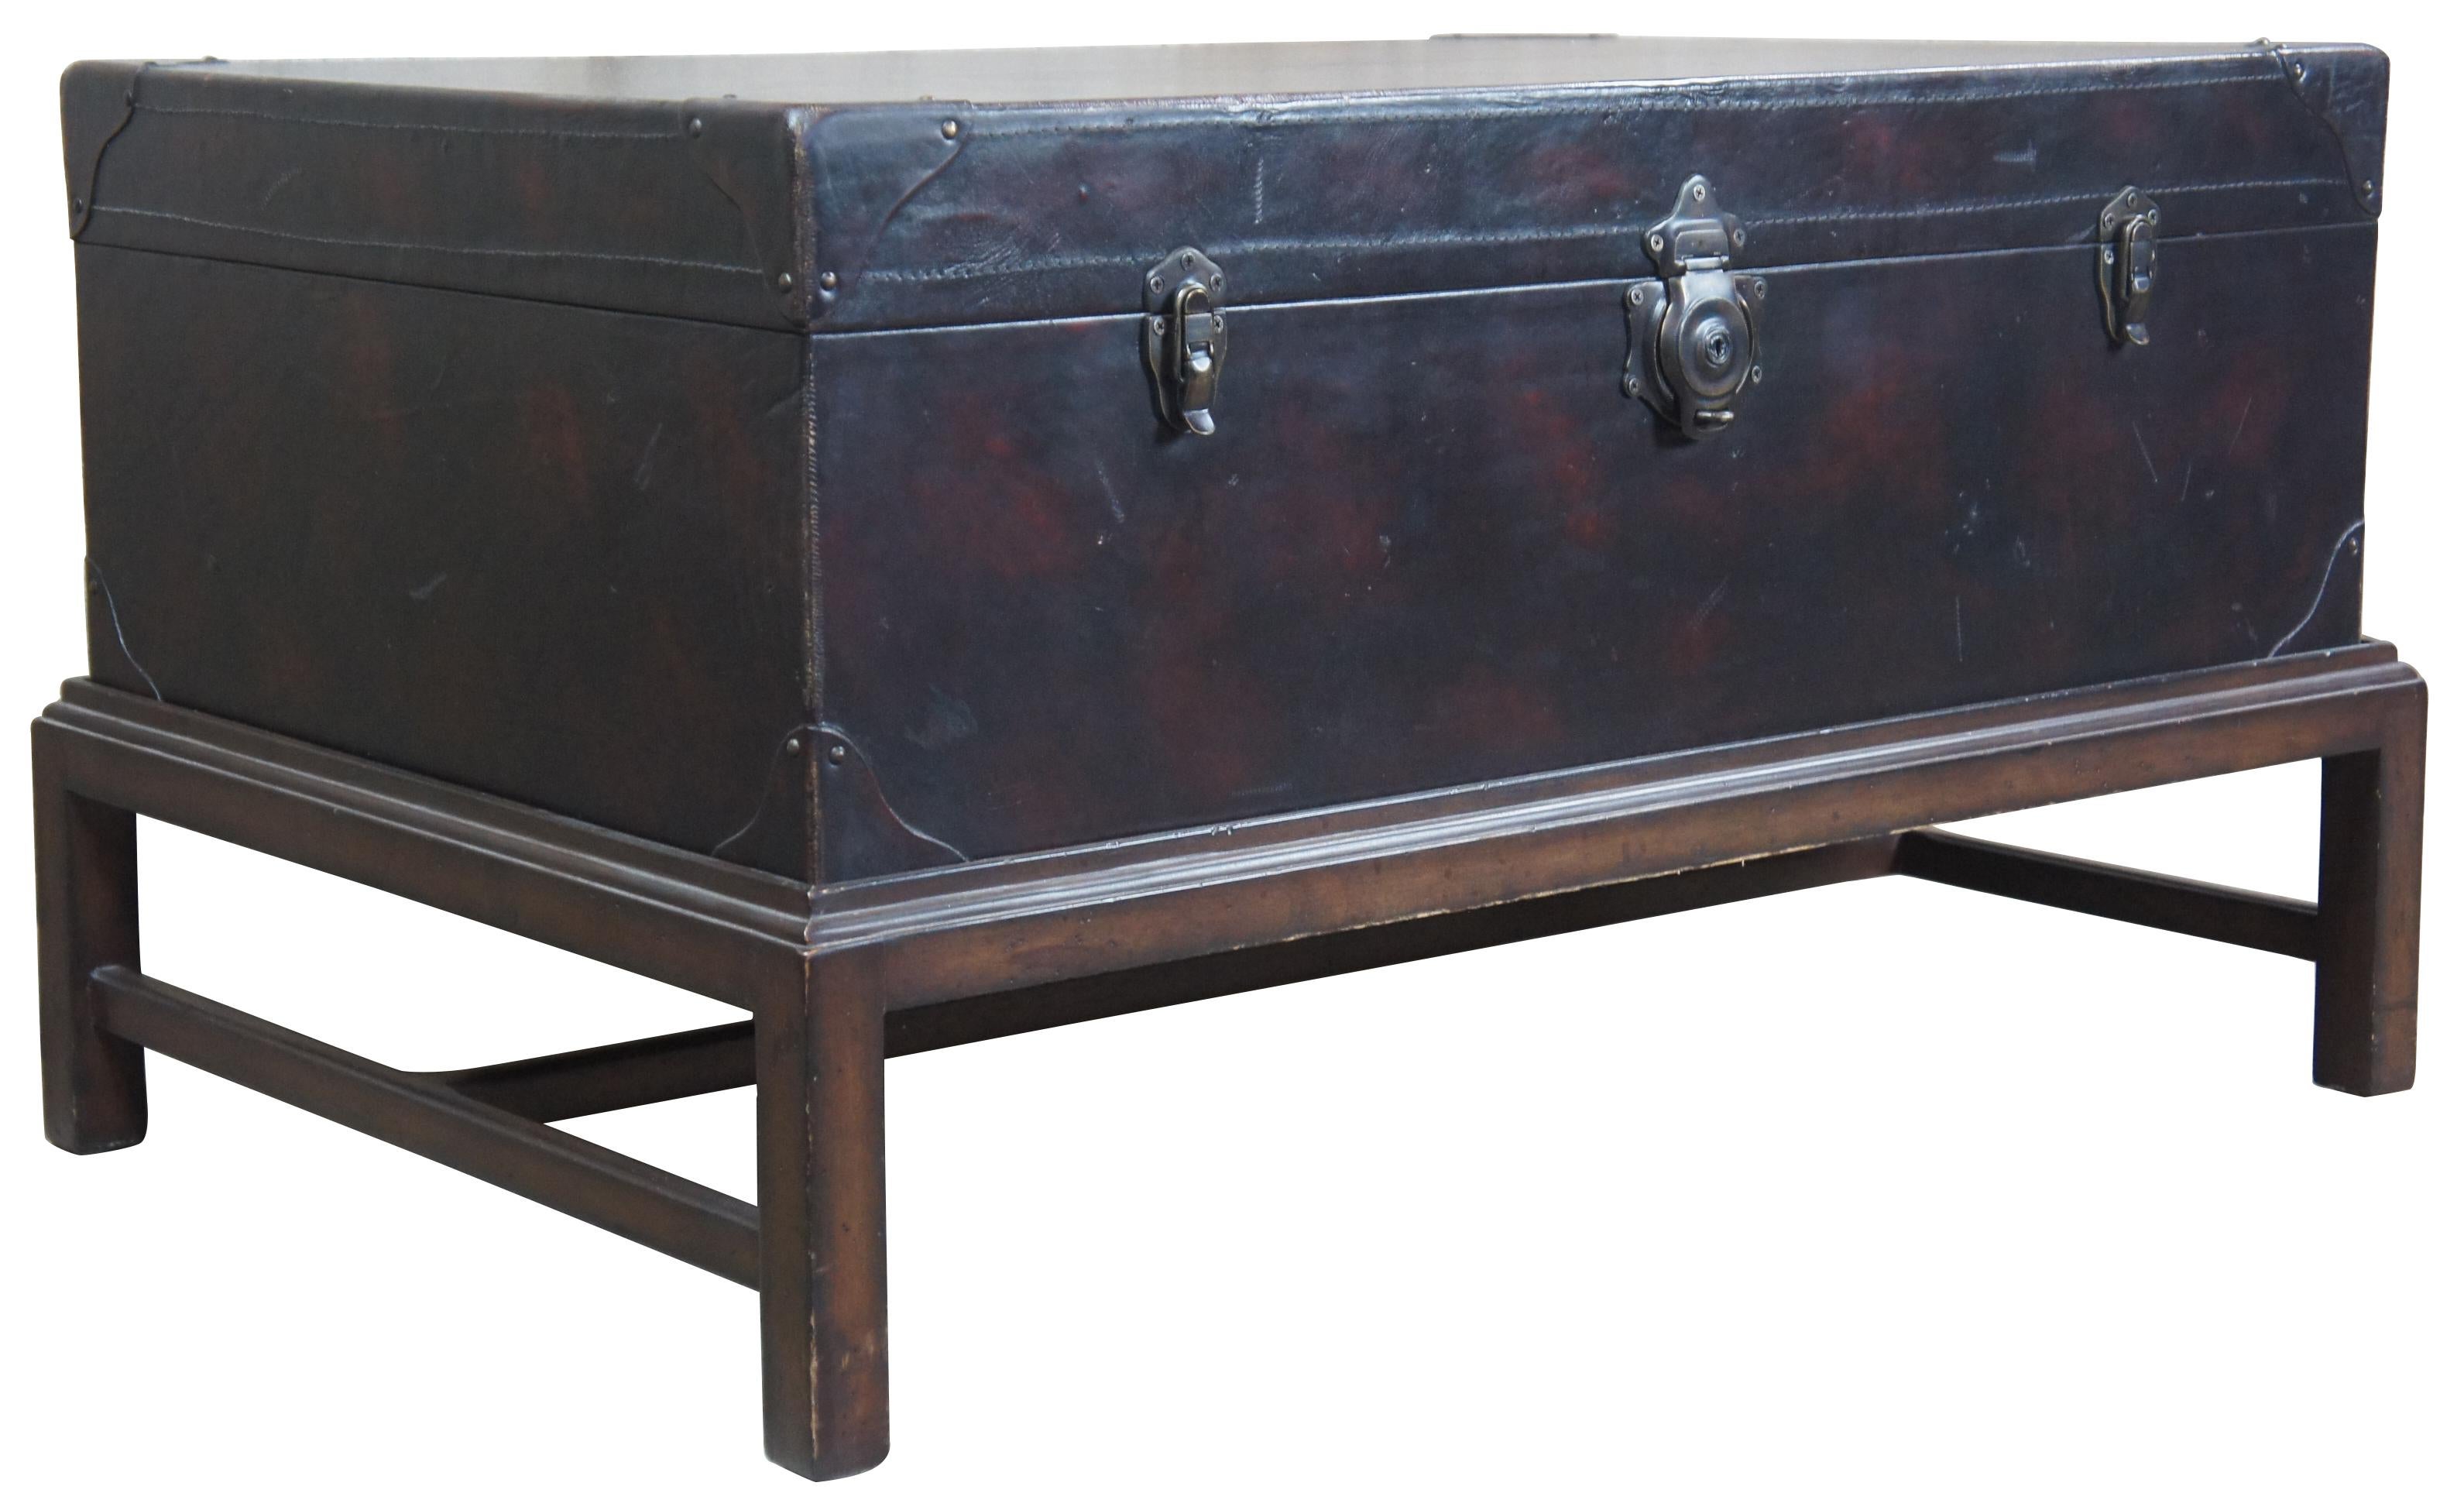 Ralph Lauren distressed leather steam trunk coffee table on stand 40